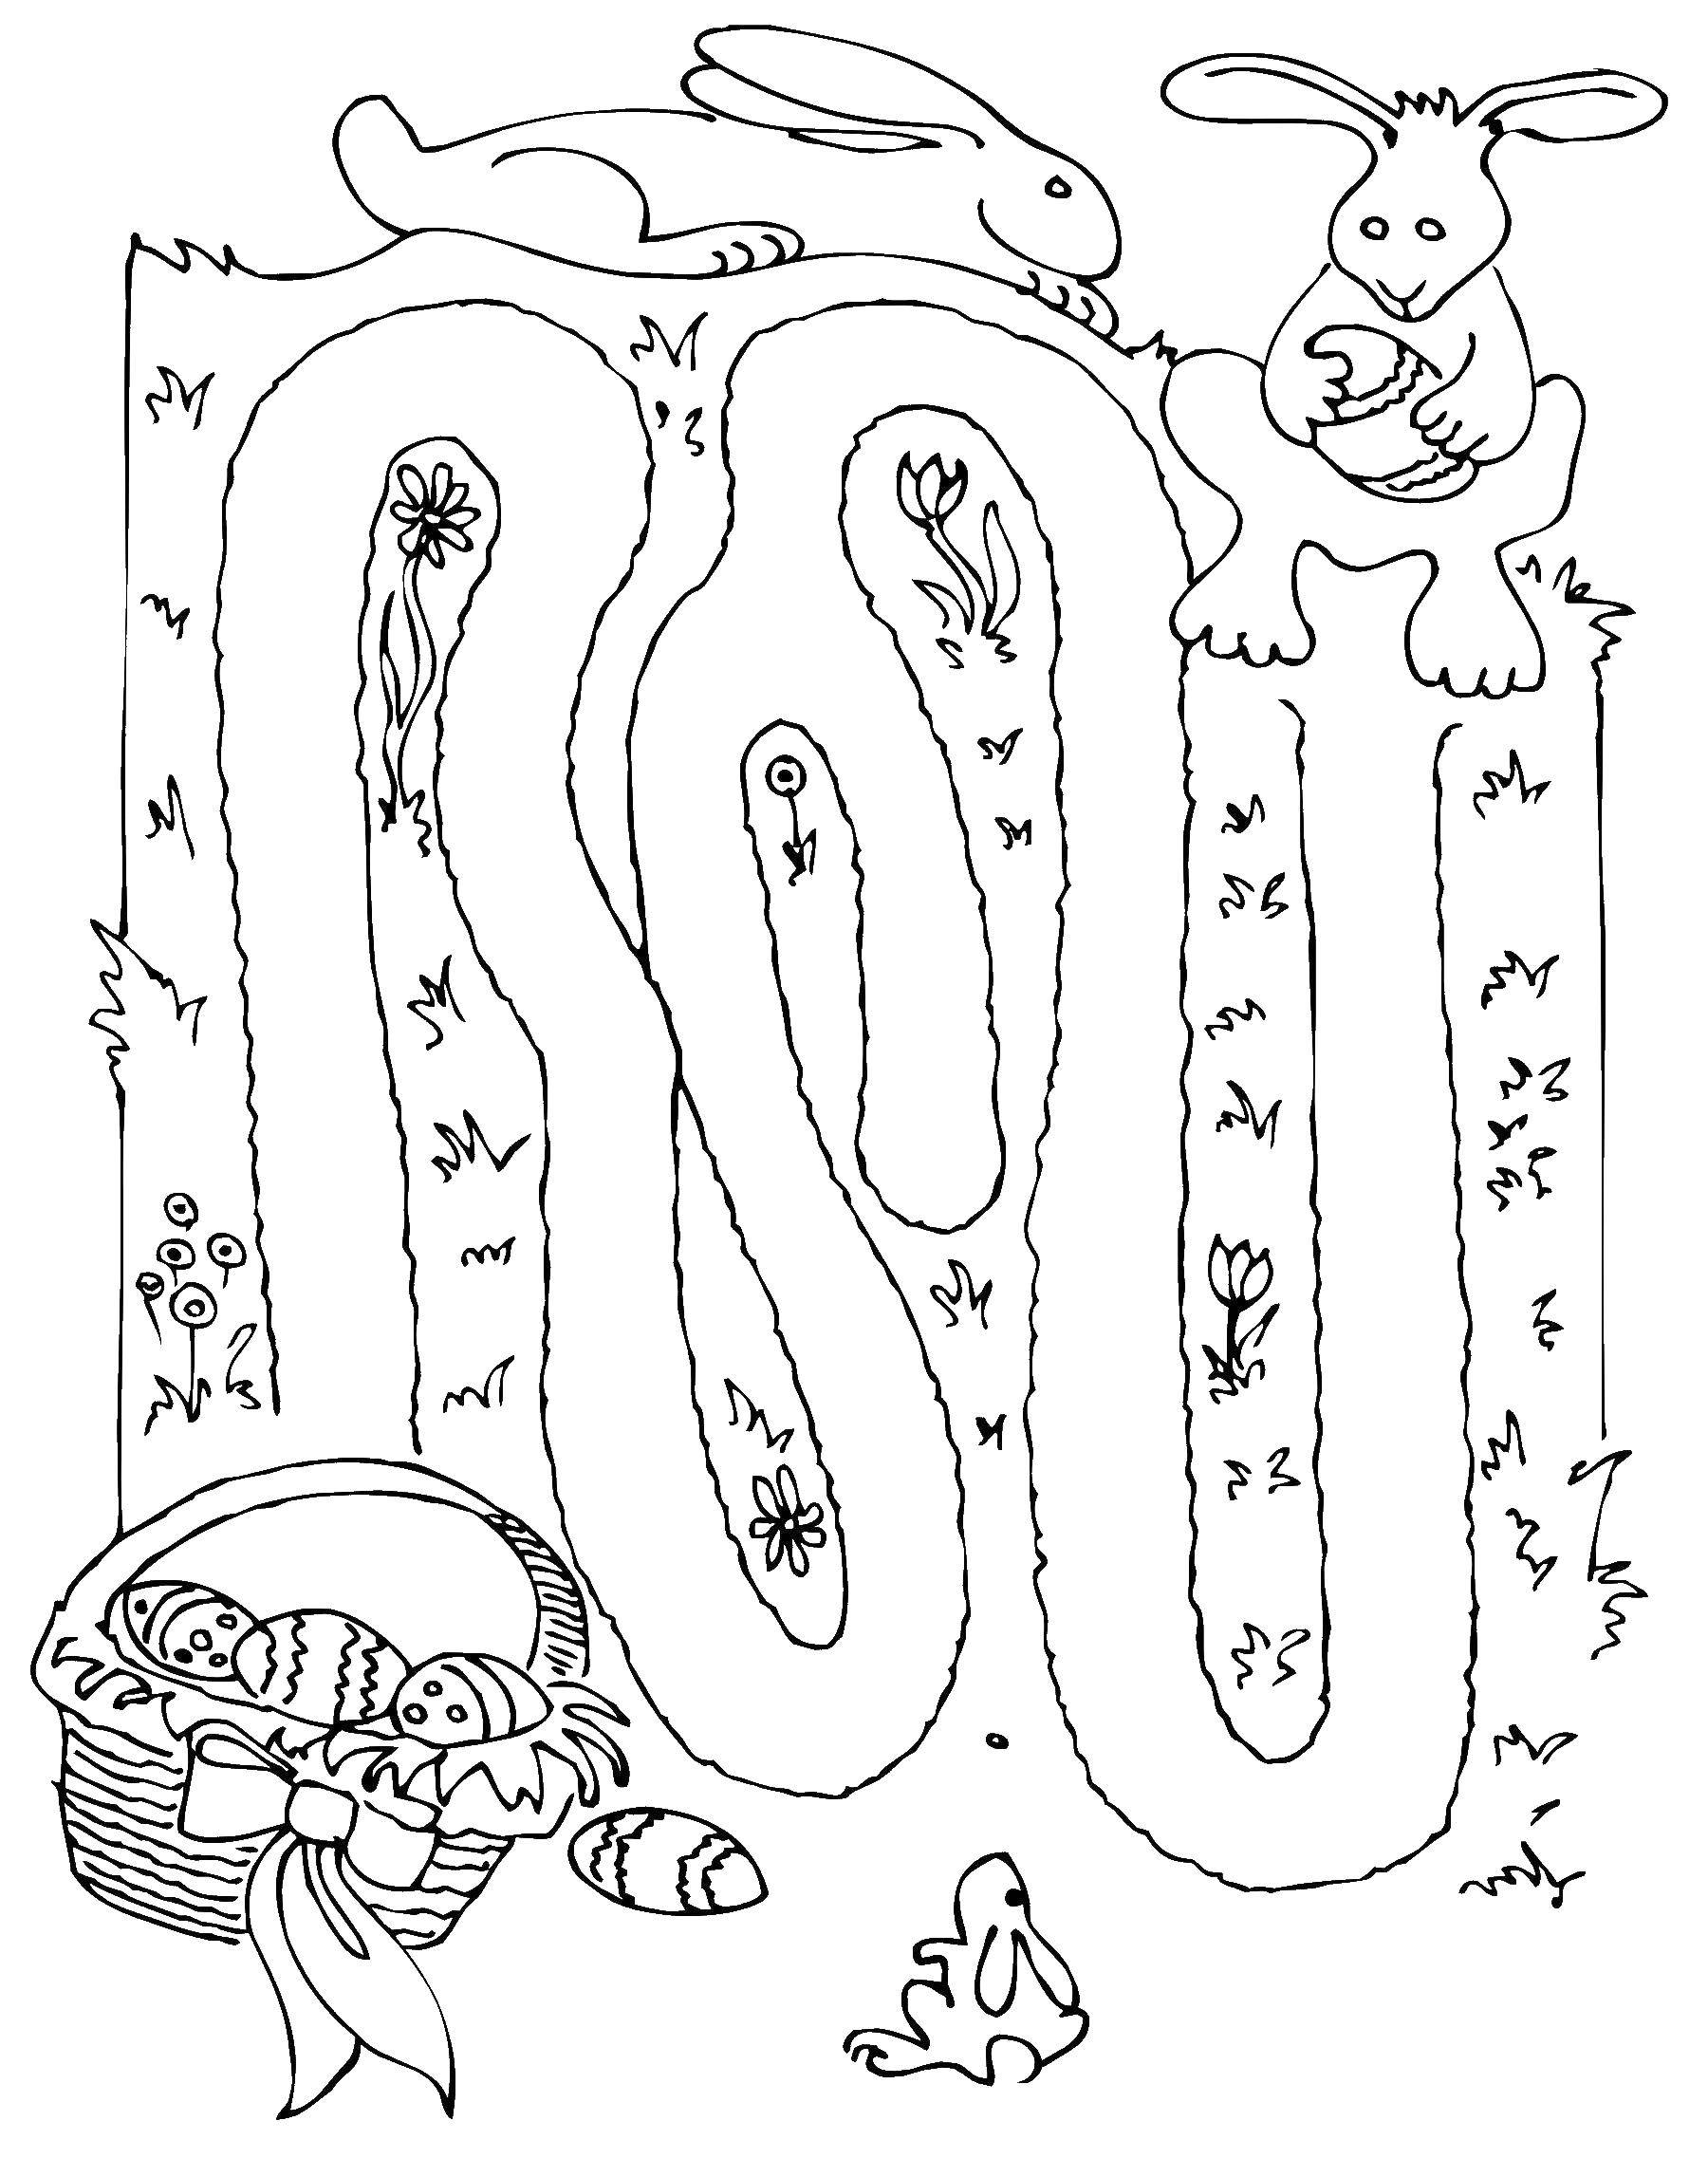 Coloring Maze the Easter Bunny. Category Mazes. Tags:  the labyrinth, rabbit.